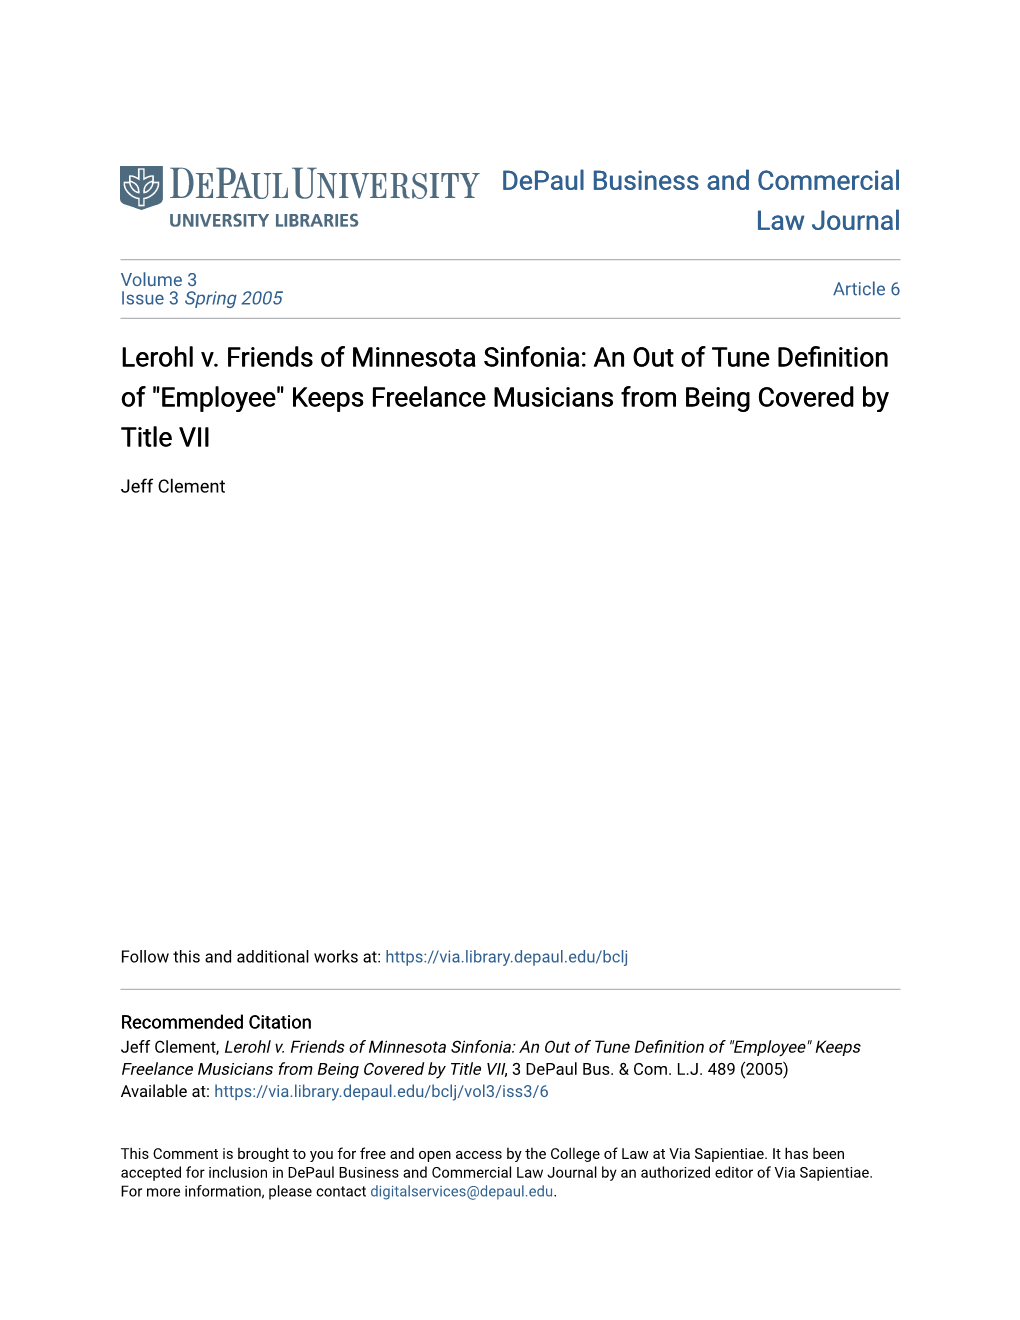 Lerohl V. Friends of Minnesota Sinfonia: an out of Tune Definition of "Employee" Keeps Freelance Musicians from Being Covered by Title VII